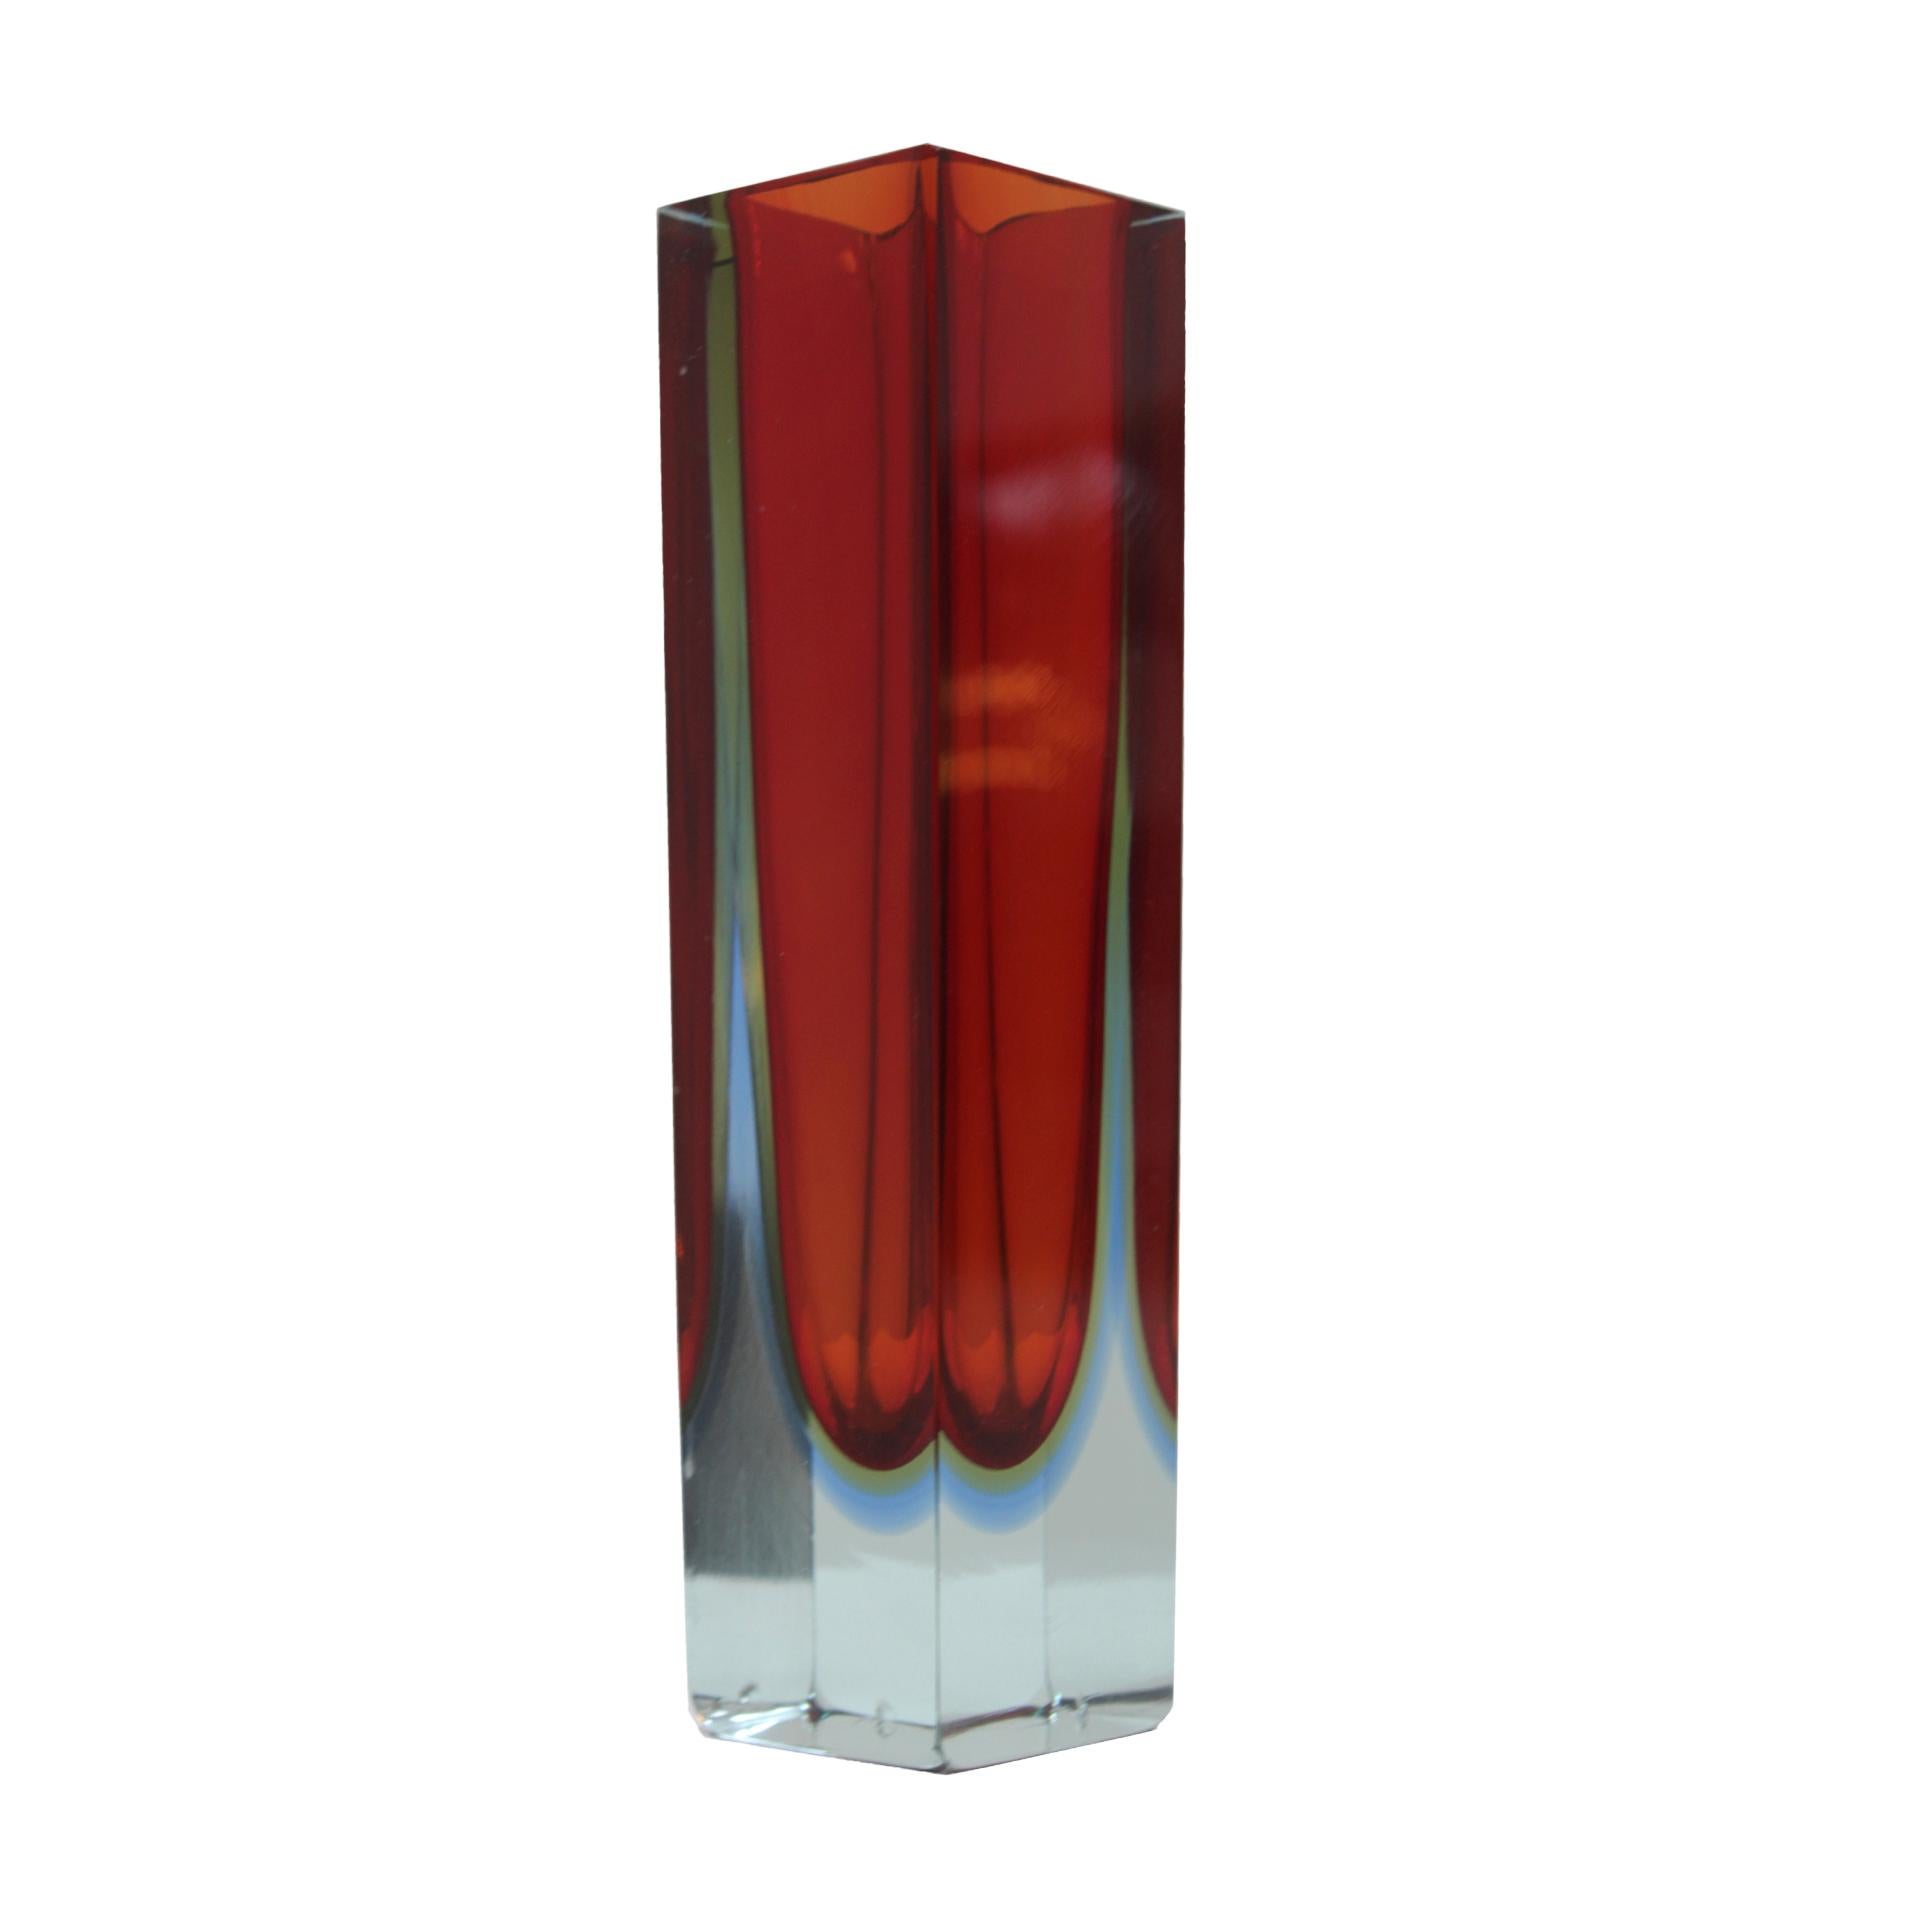 Mid-century Modern Glass vase. Attributed to Flavio Poli for Seguso. Italy, 50s.
In sommerso glass, the red body is submerged in a very slightly blue mass. (Color variant Rosso – Zafiro)

Every item LA Studio offers is checked by our team of 10